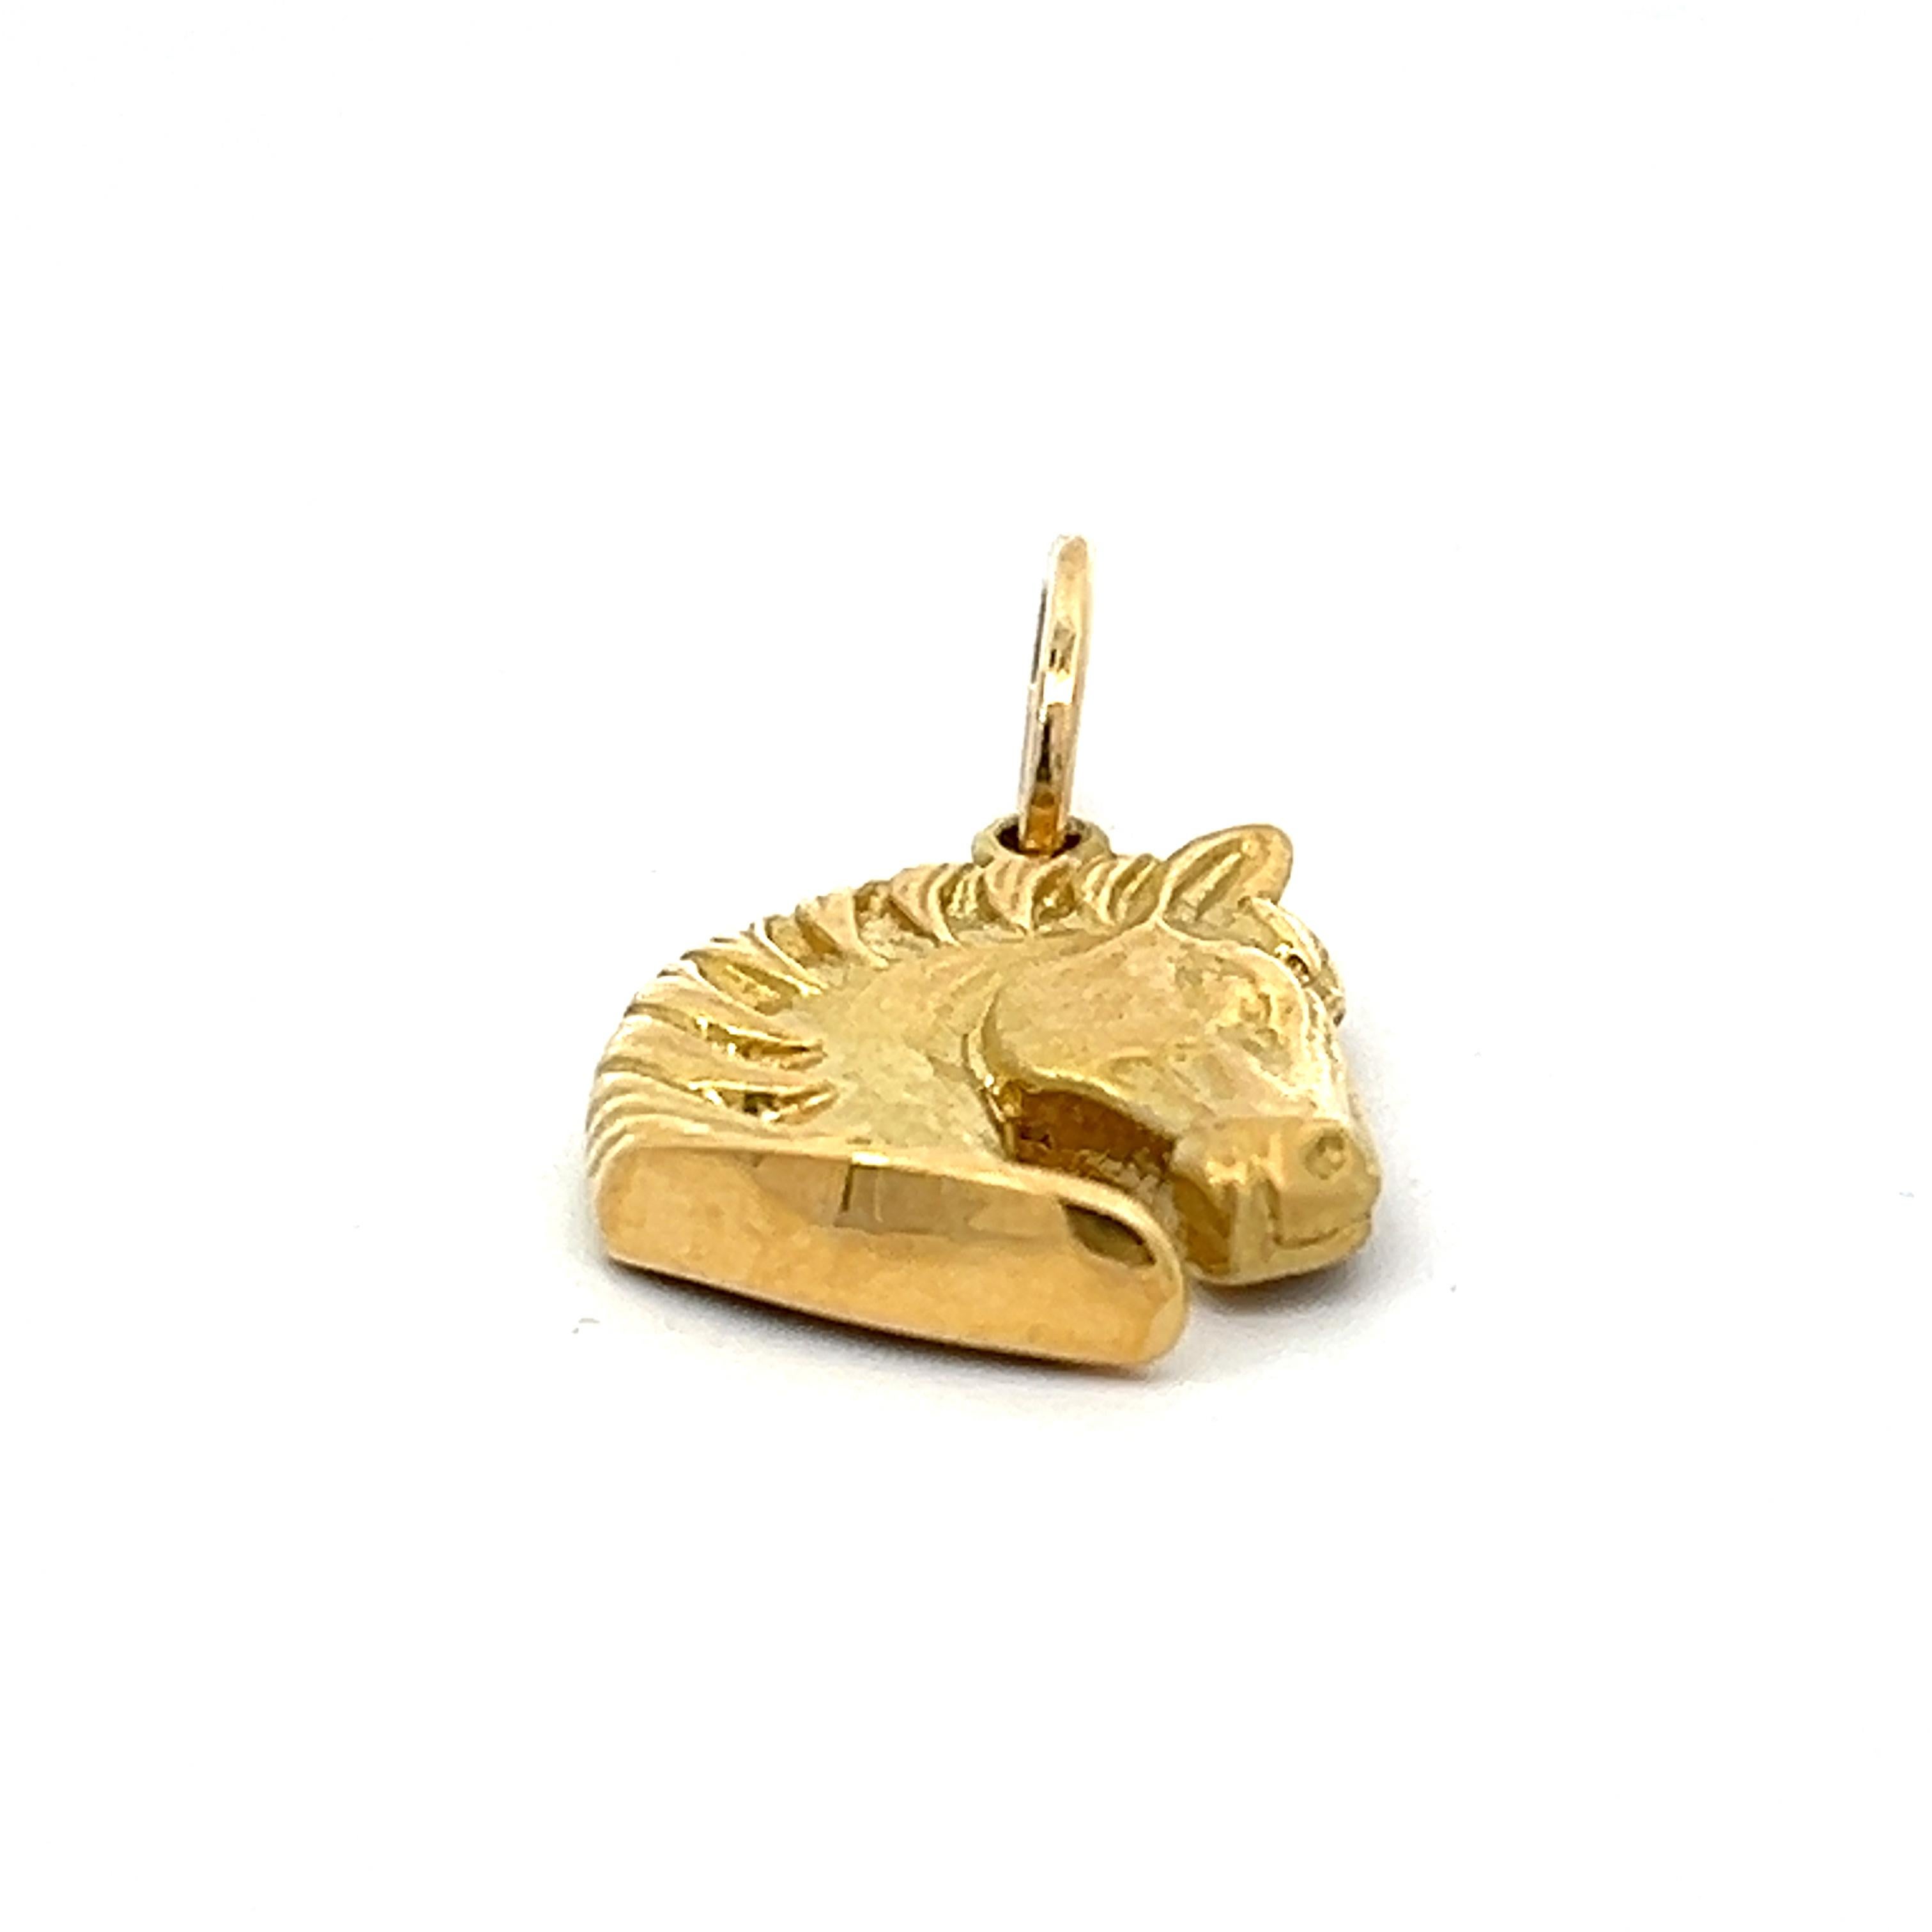 Equestrian elegance meets exquisite craftsmanship in our 18k Yellow Gold Horse Pendant—a radiant embodiment of grace and strength. This finely detailed pendant captures the majestic spirit of a horse in a compact 19 x 16mm size, not including the